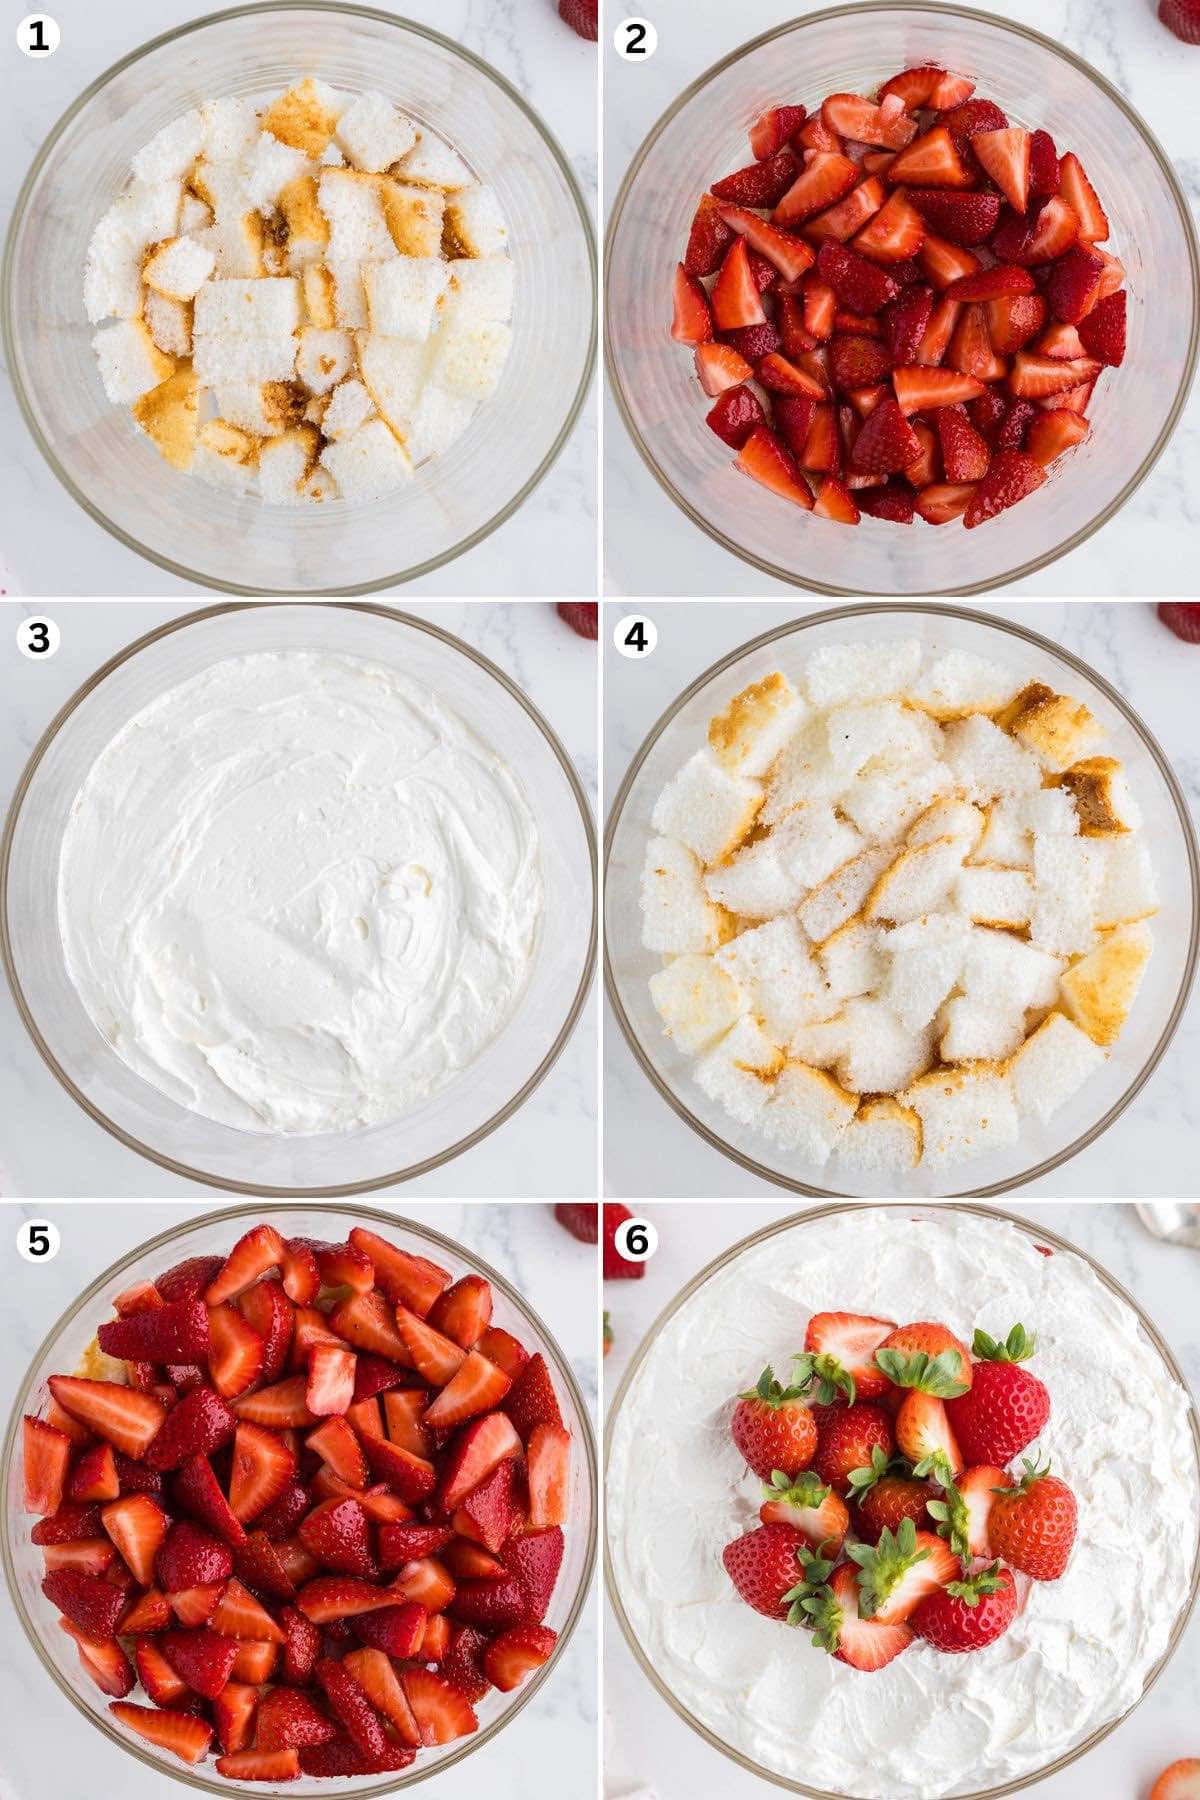 place the cake layer at the bottom of the trifle bowl. top with strawberries, cream cheese, another layer of cake, strawberries and whipped cream.